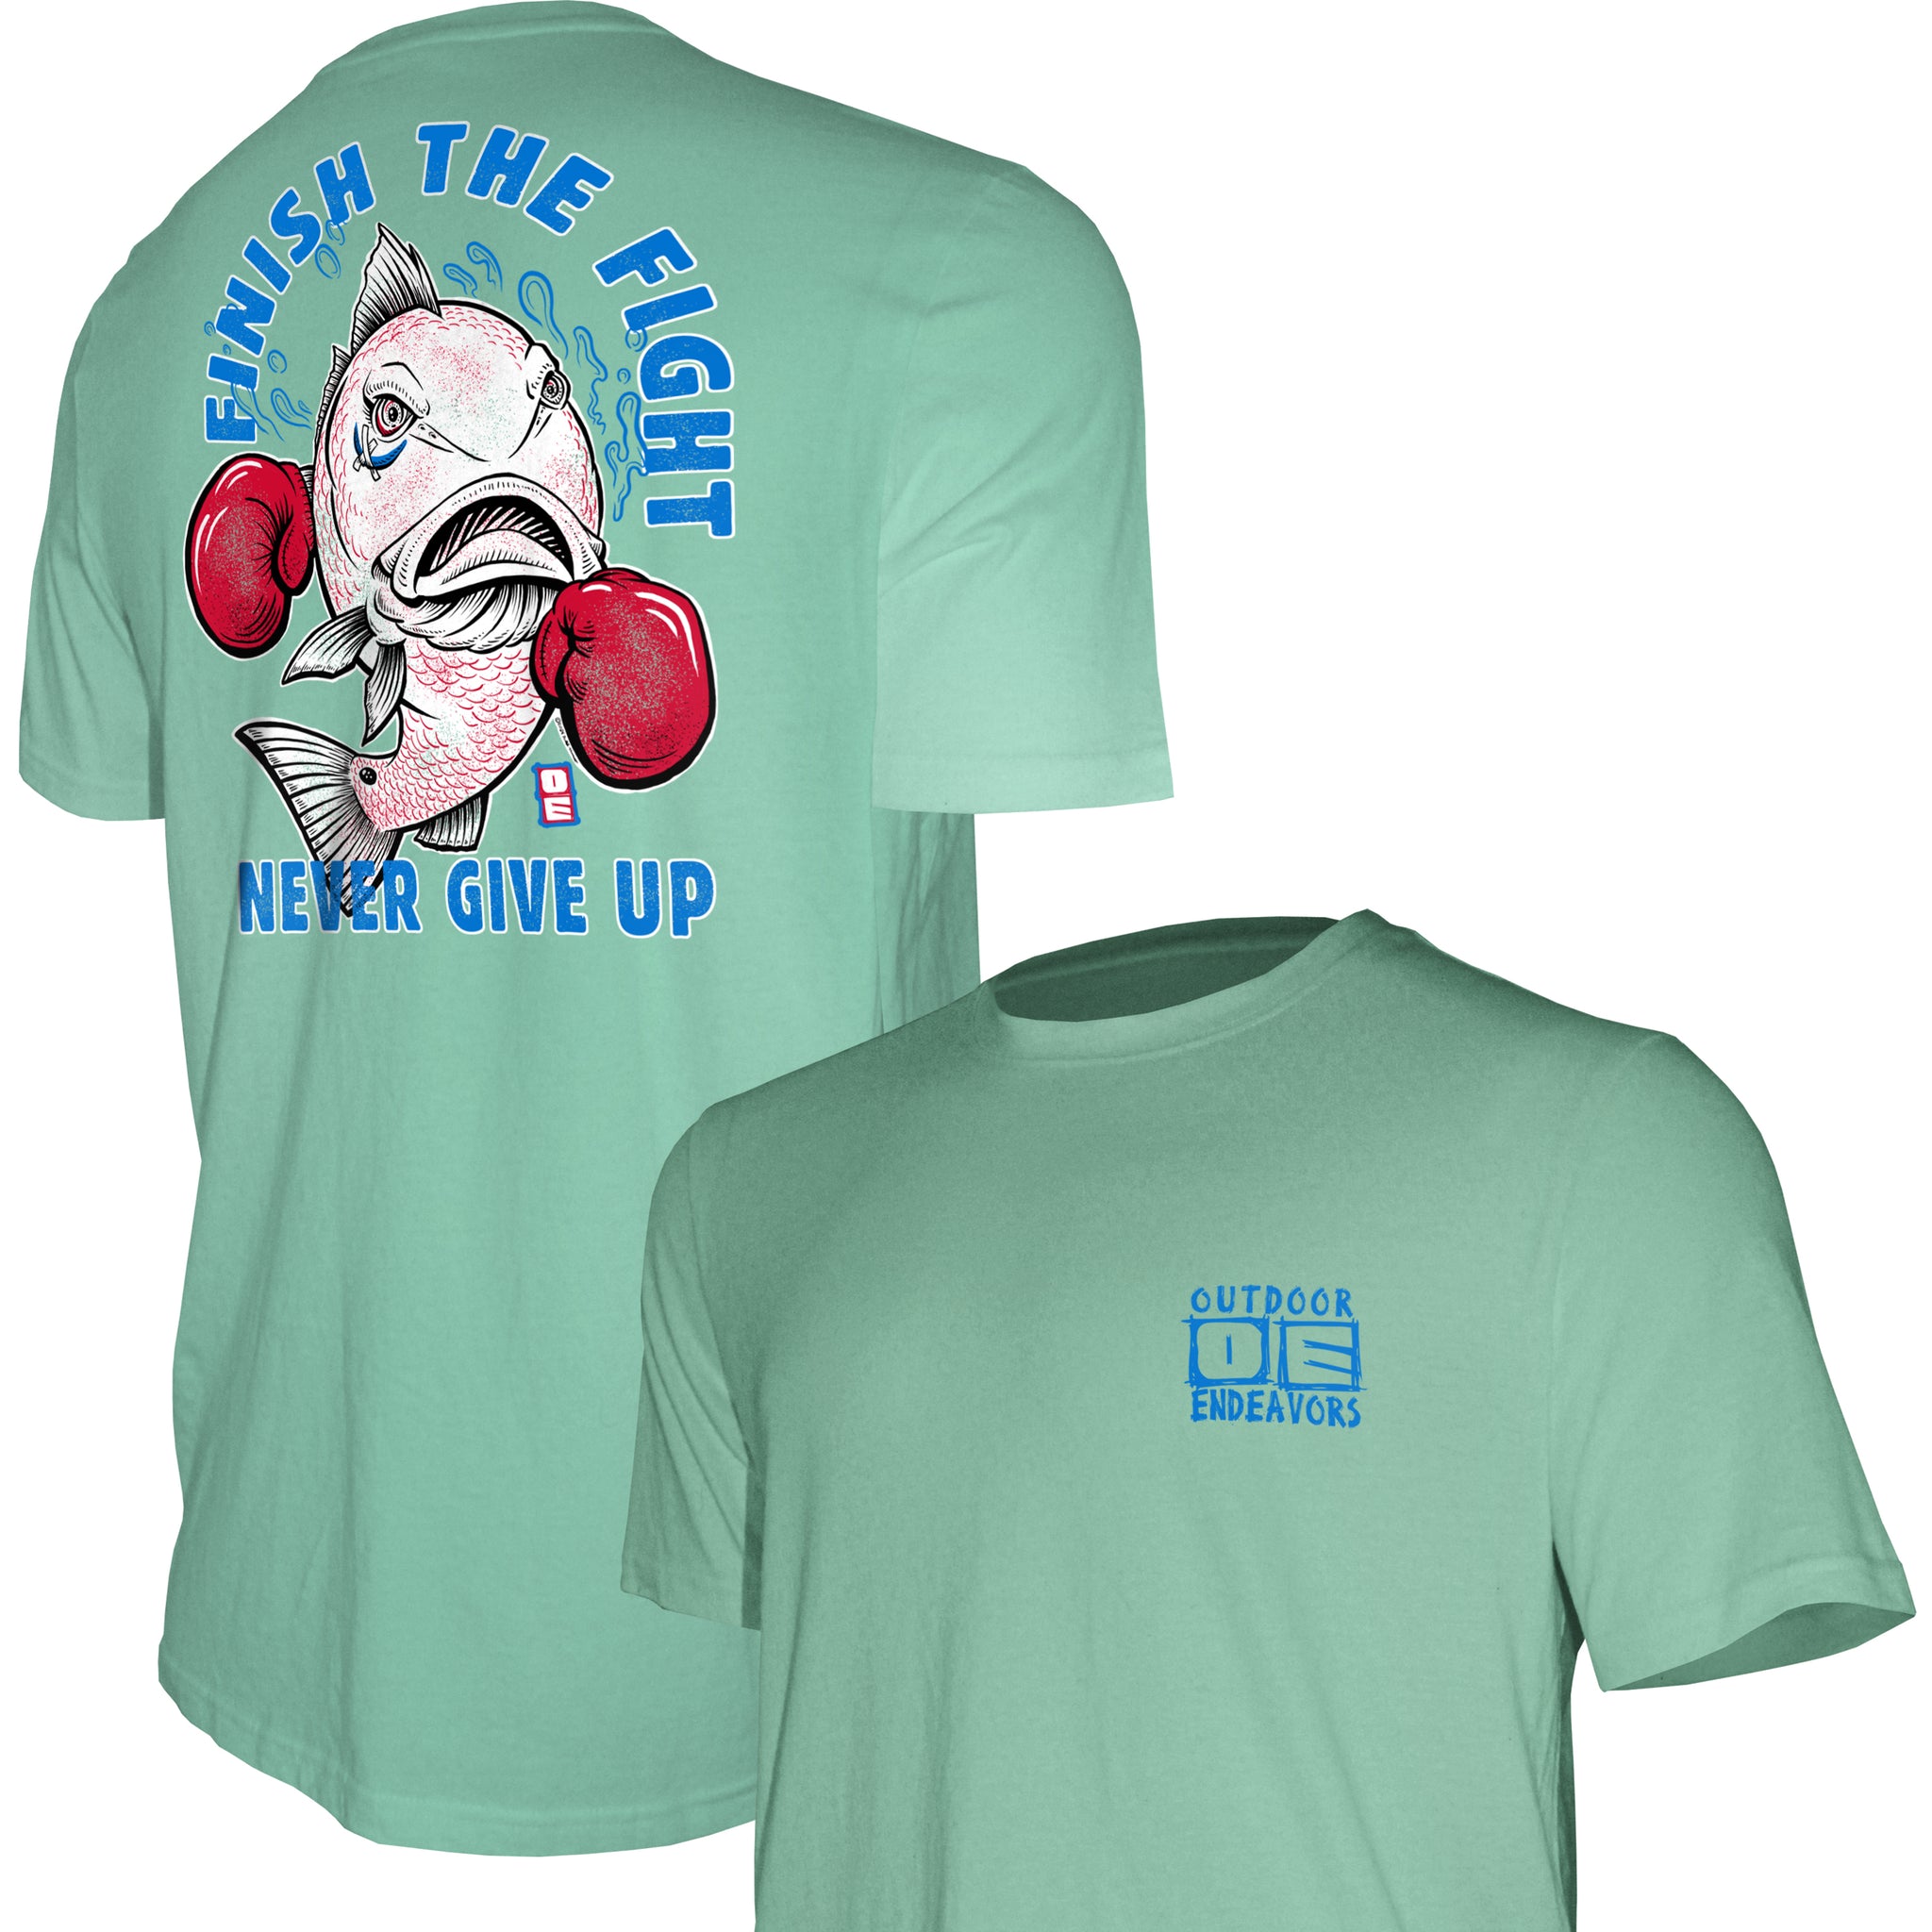 Outdoor Endeavors Attitude- American Made Tee - Finish the Fight